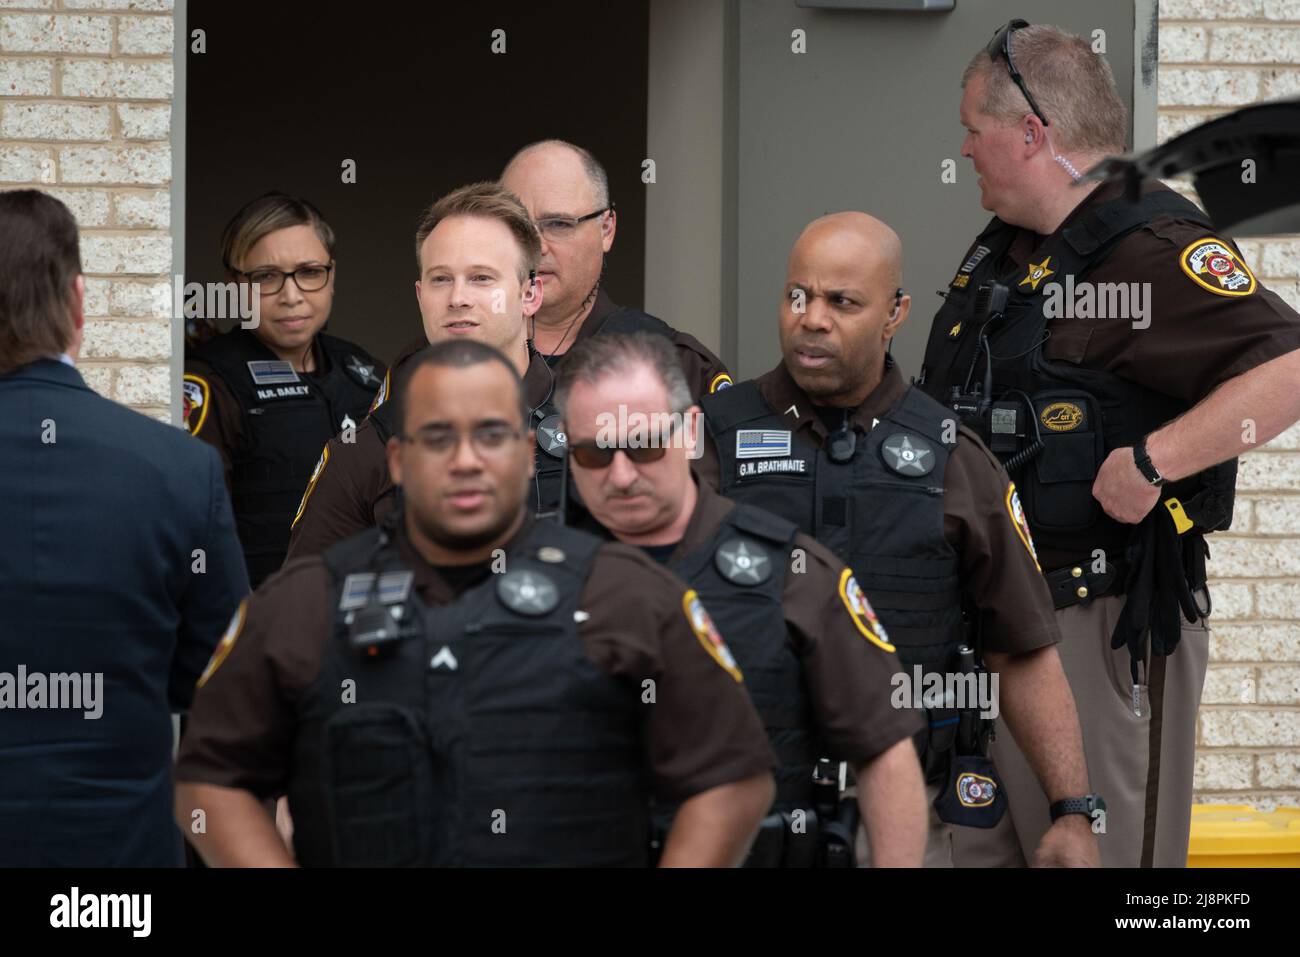 Fairfax County Sheriff's Deputies exit the courthouse to provide crowd control for Johnny Depp and Amber Hearts departure from the Fairfax County Courthouse, in Fairfax, at the close of another day in his civil trial with Amber Heard, Thursday, May 5, 2022. Depp brought a defamation lawsuit against his former wife, actress Amber Heard, after she wrote an op-ed in The Washington Post in 2018 that, without naming Depp, accused him of domestic abuse.Credit: Cliff Owen/CNP/Sipa USA (RESTRICTION: NO New York or New Jersey Newspapers or newspapers within a 75 mile radius of New York City) Stock Photo